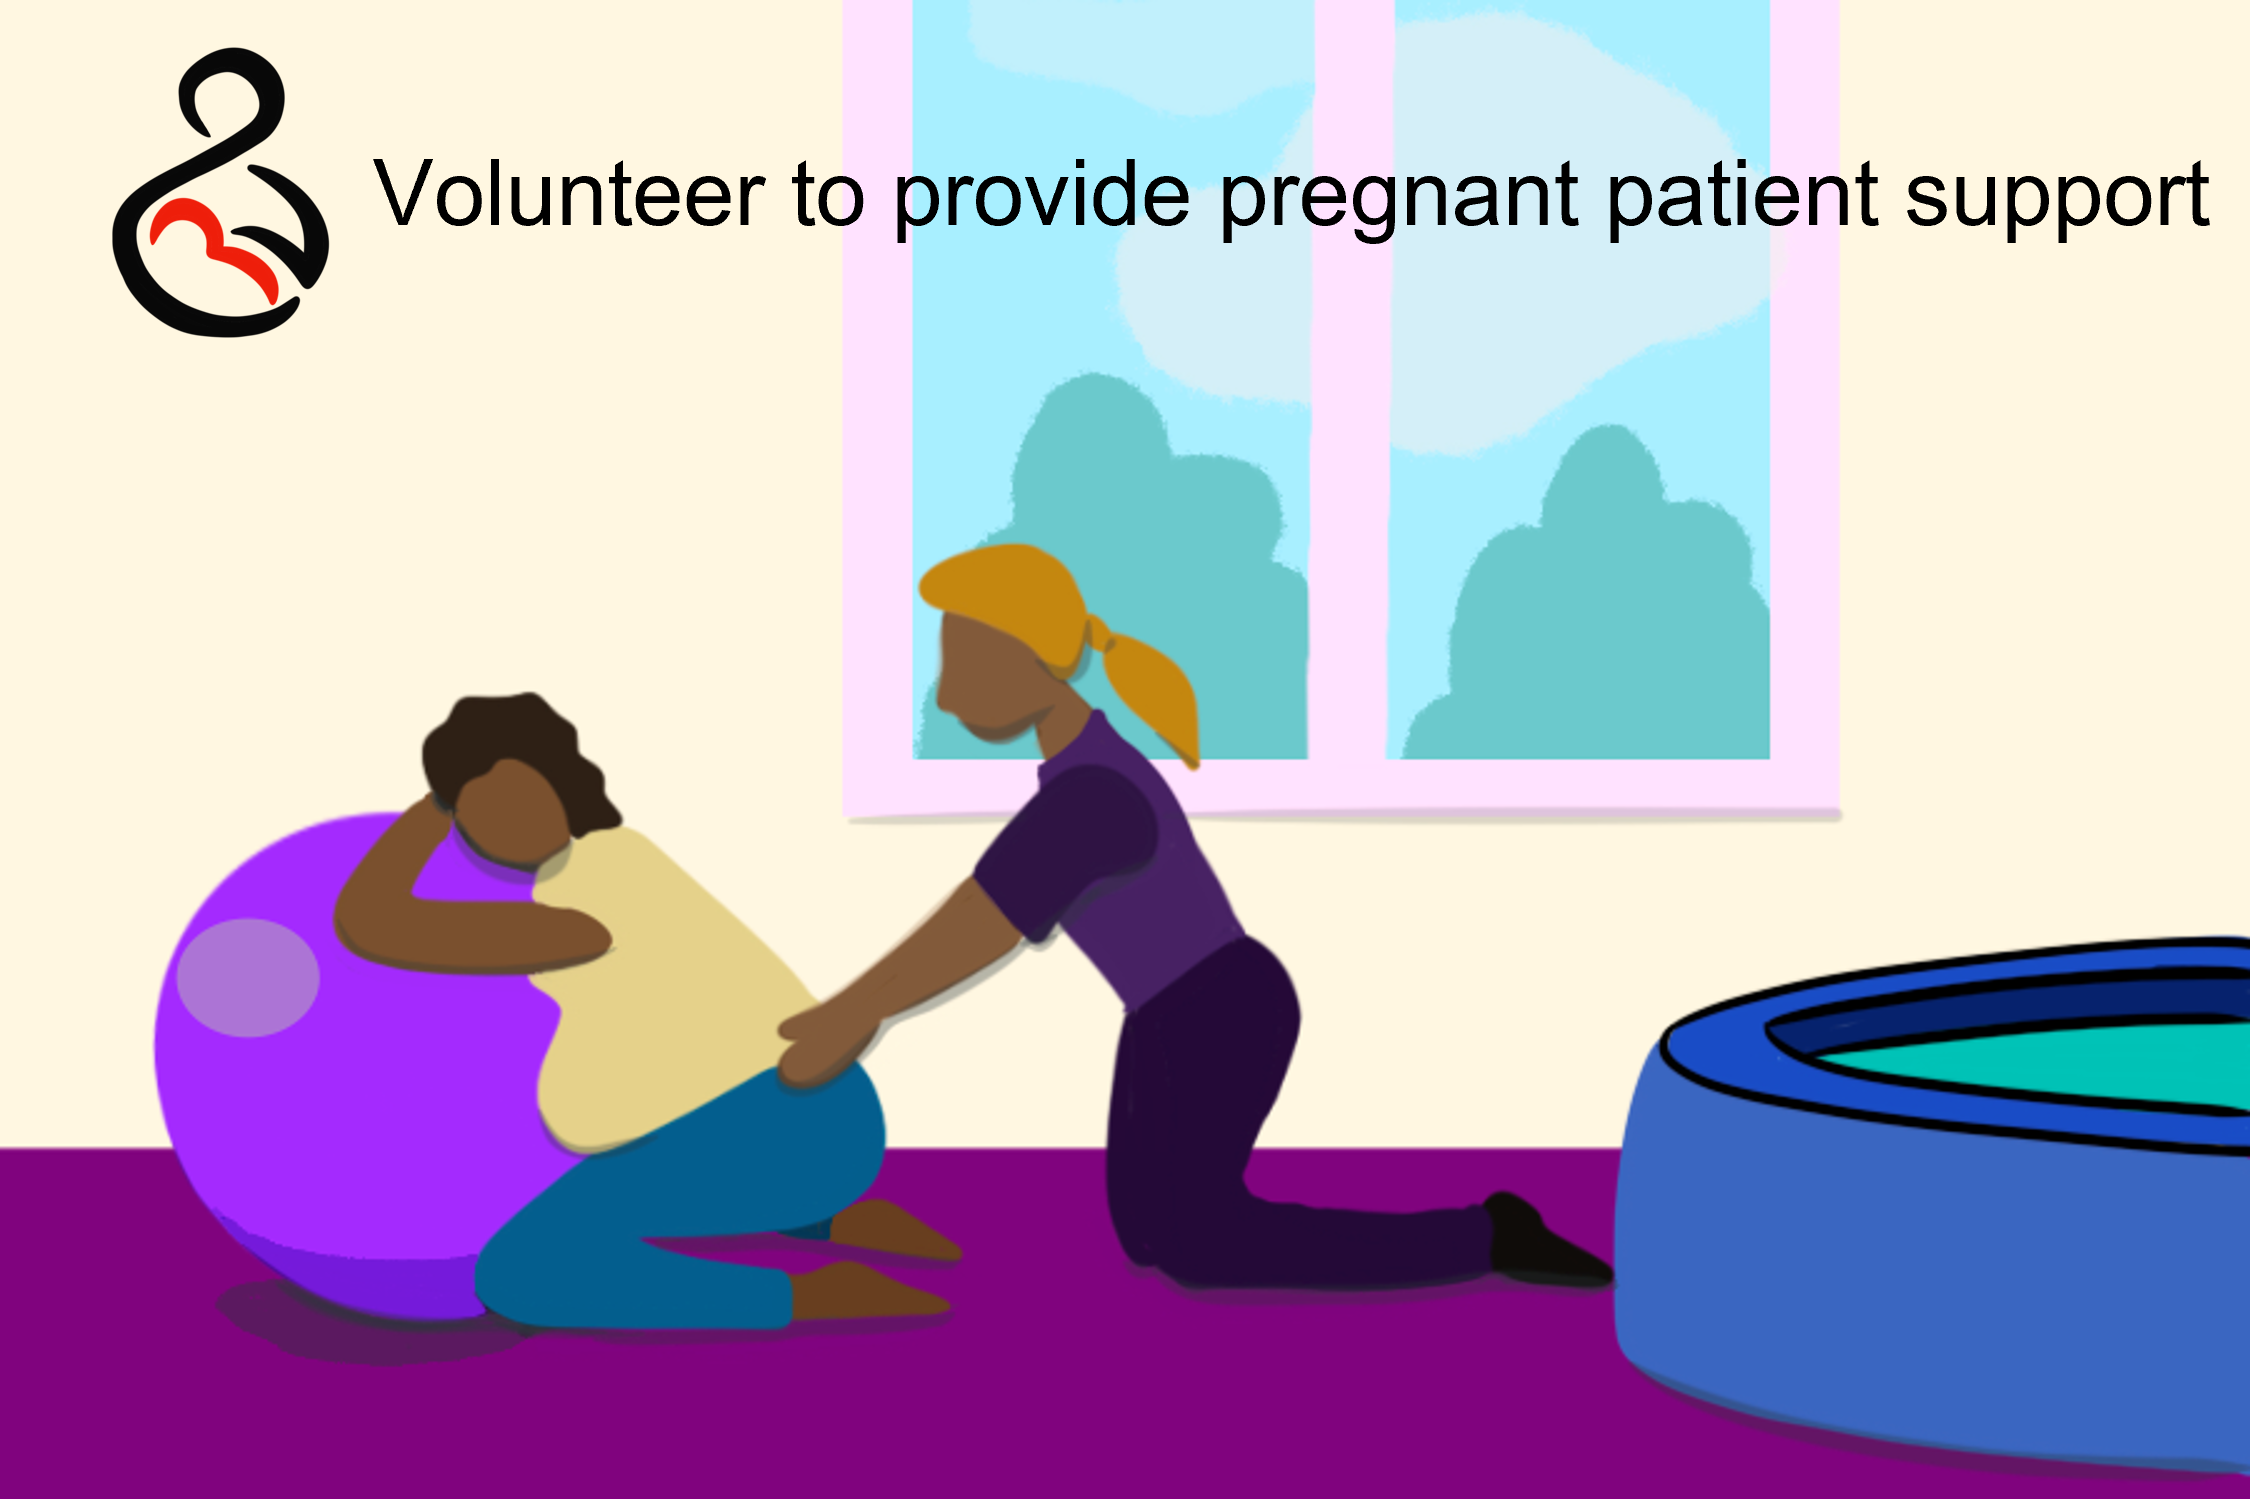 Volunteer to provide pregnant patient support